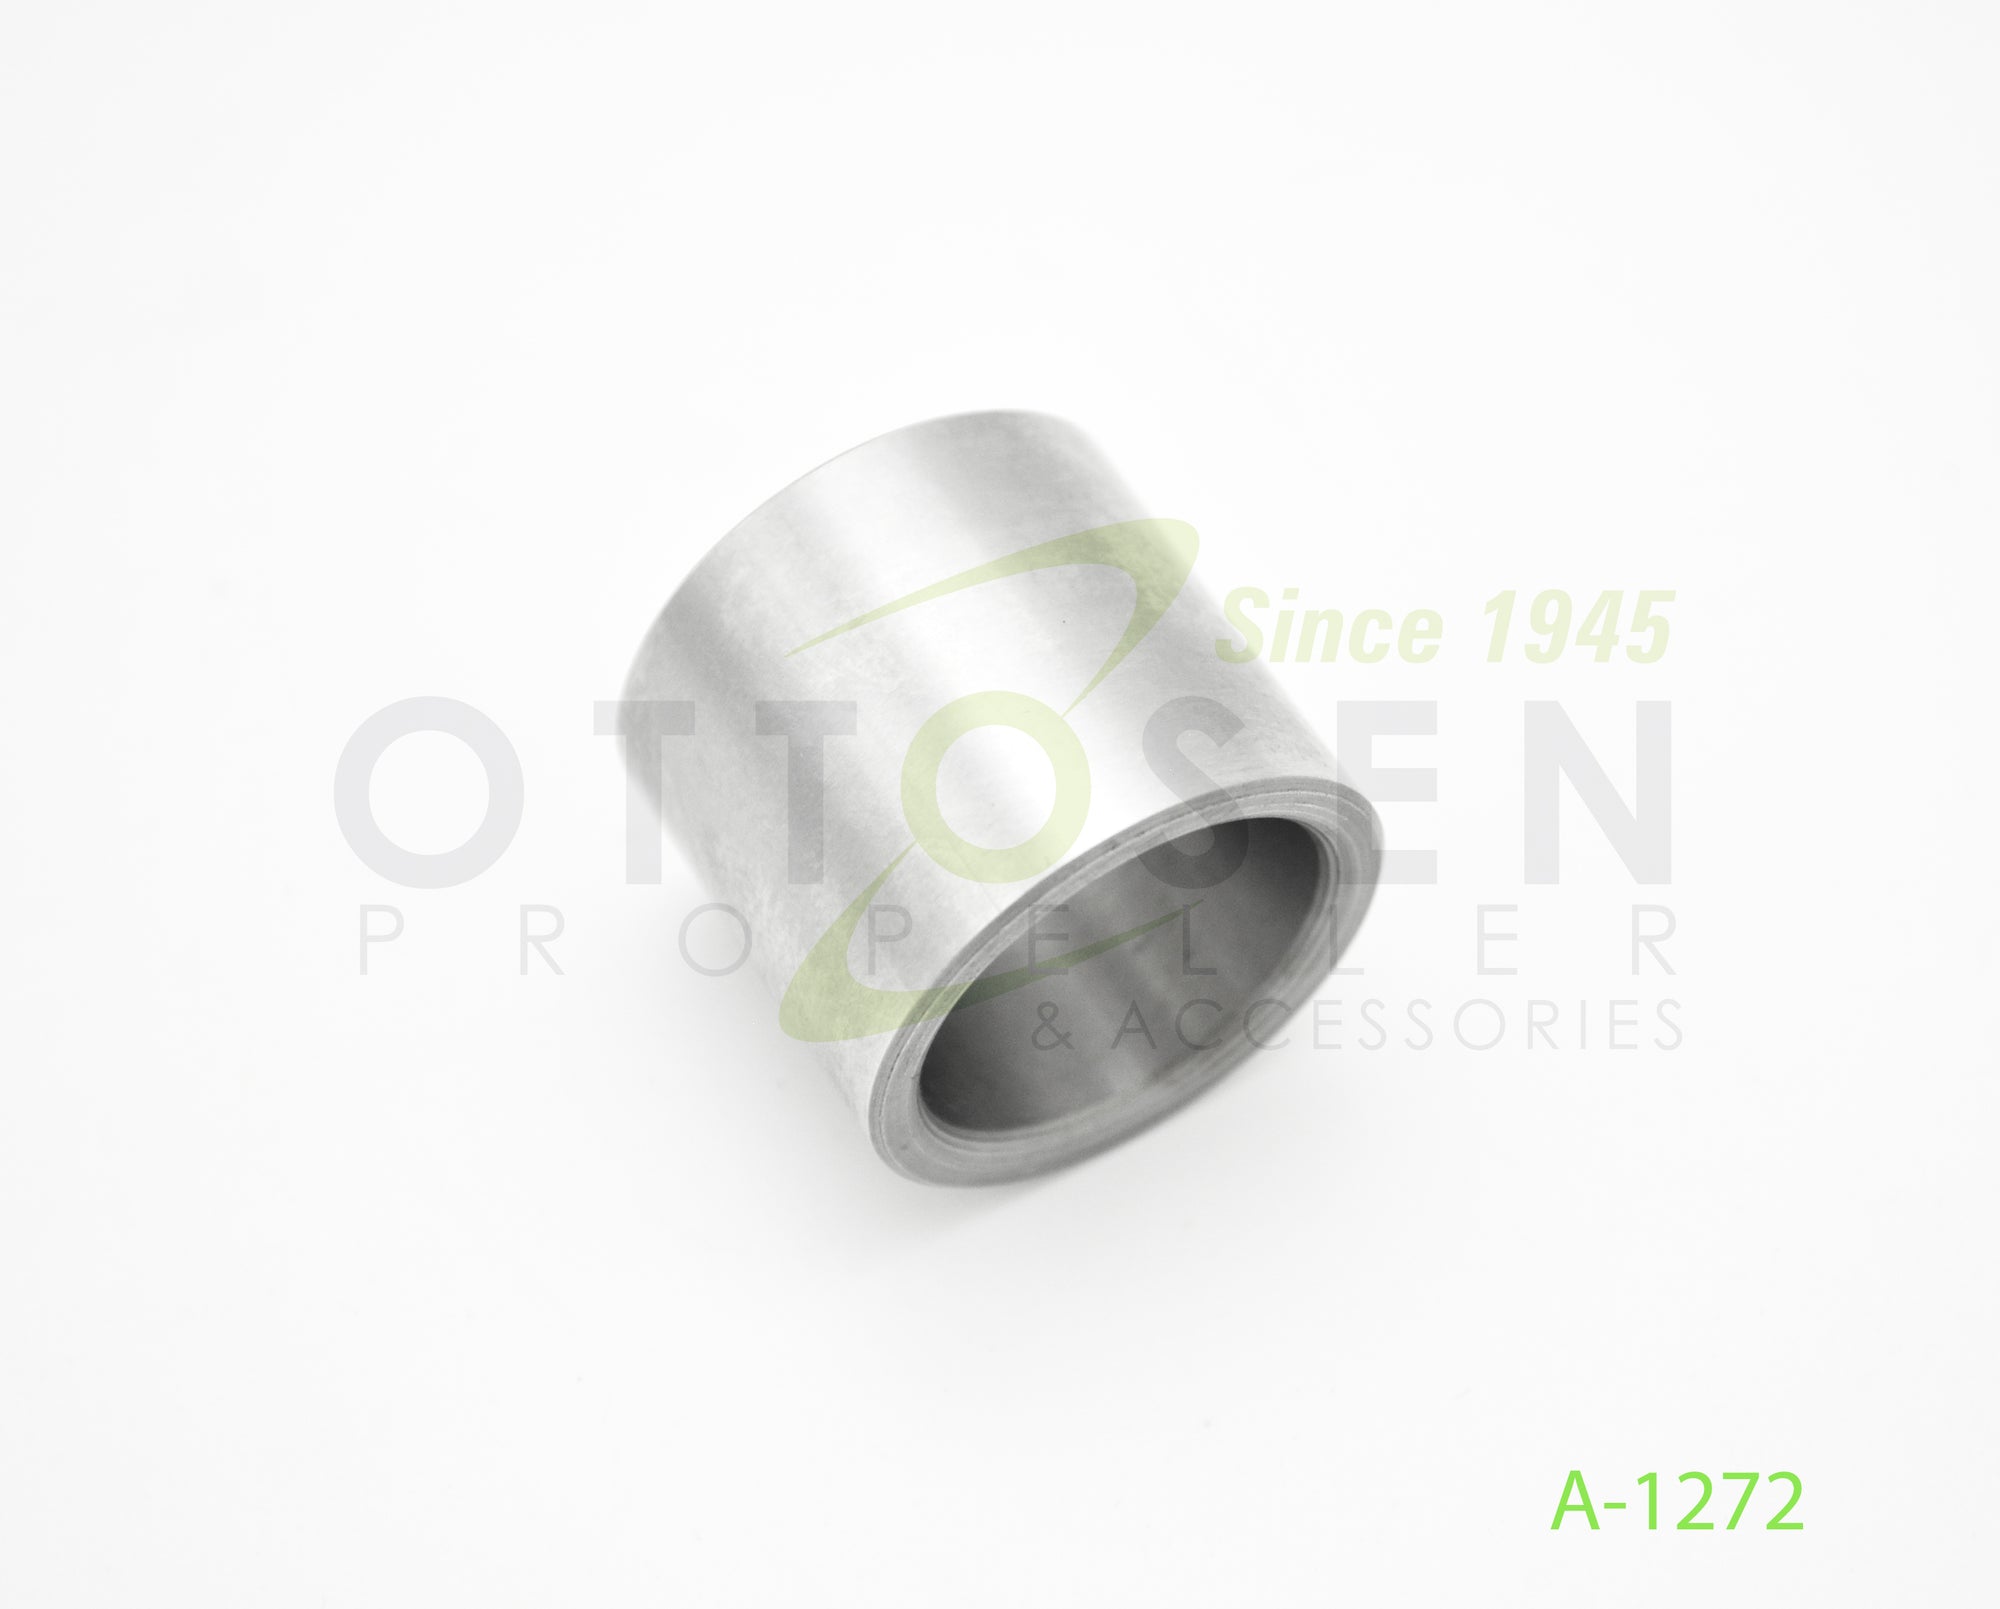 A-1272-HARTZELL-PROPELLER-BEARING-INNER-RING-PICTURE-1